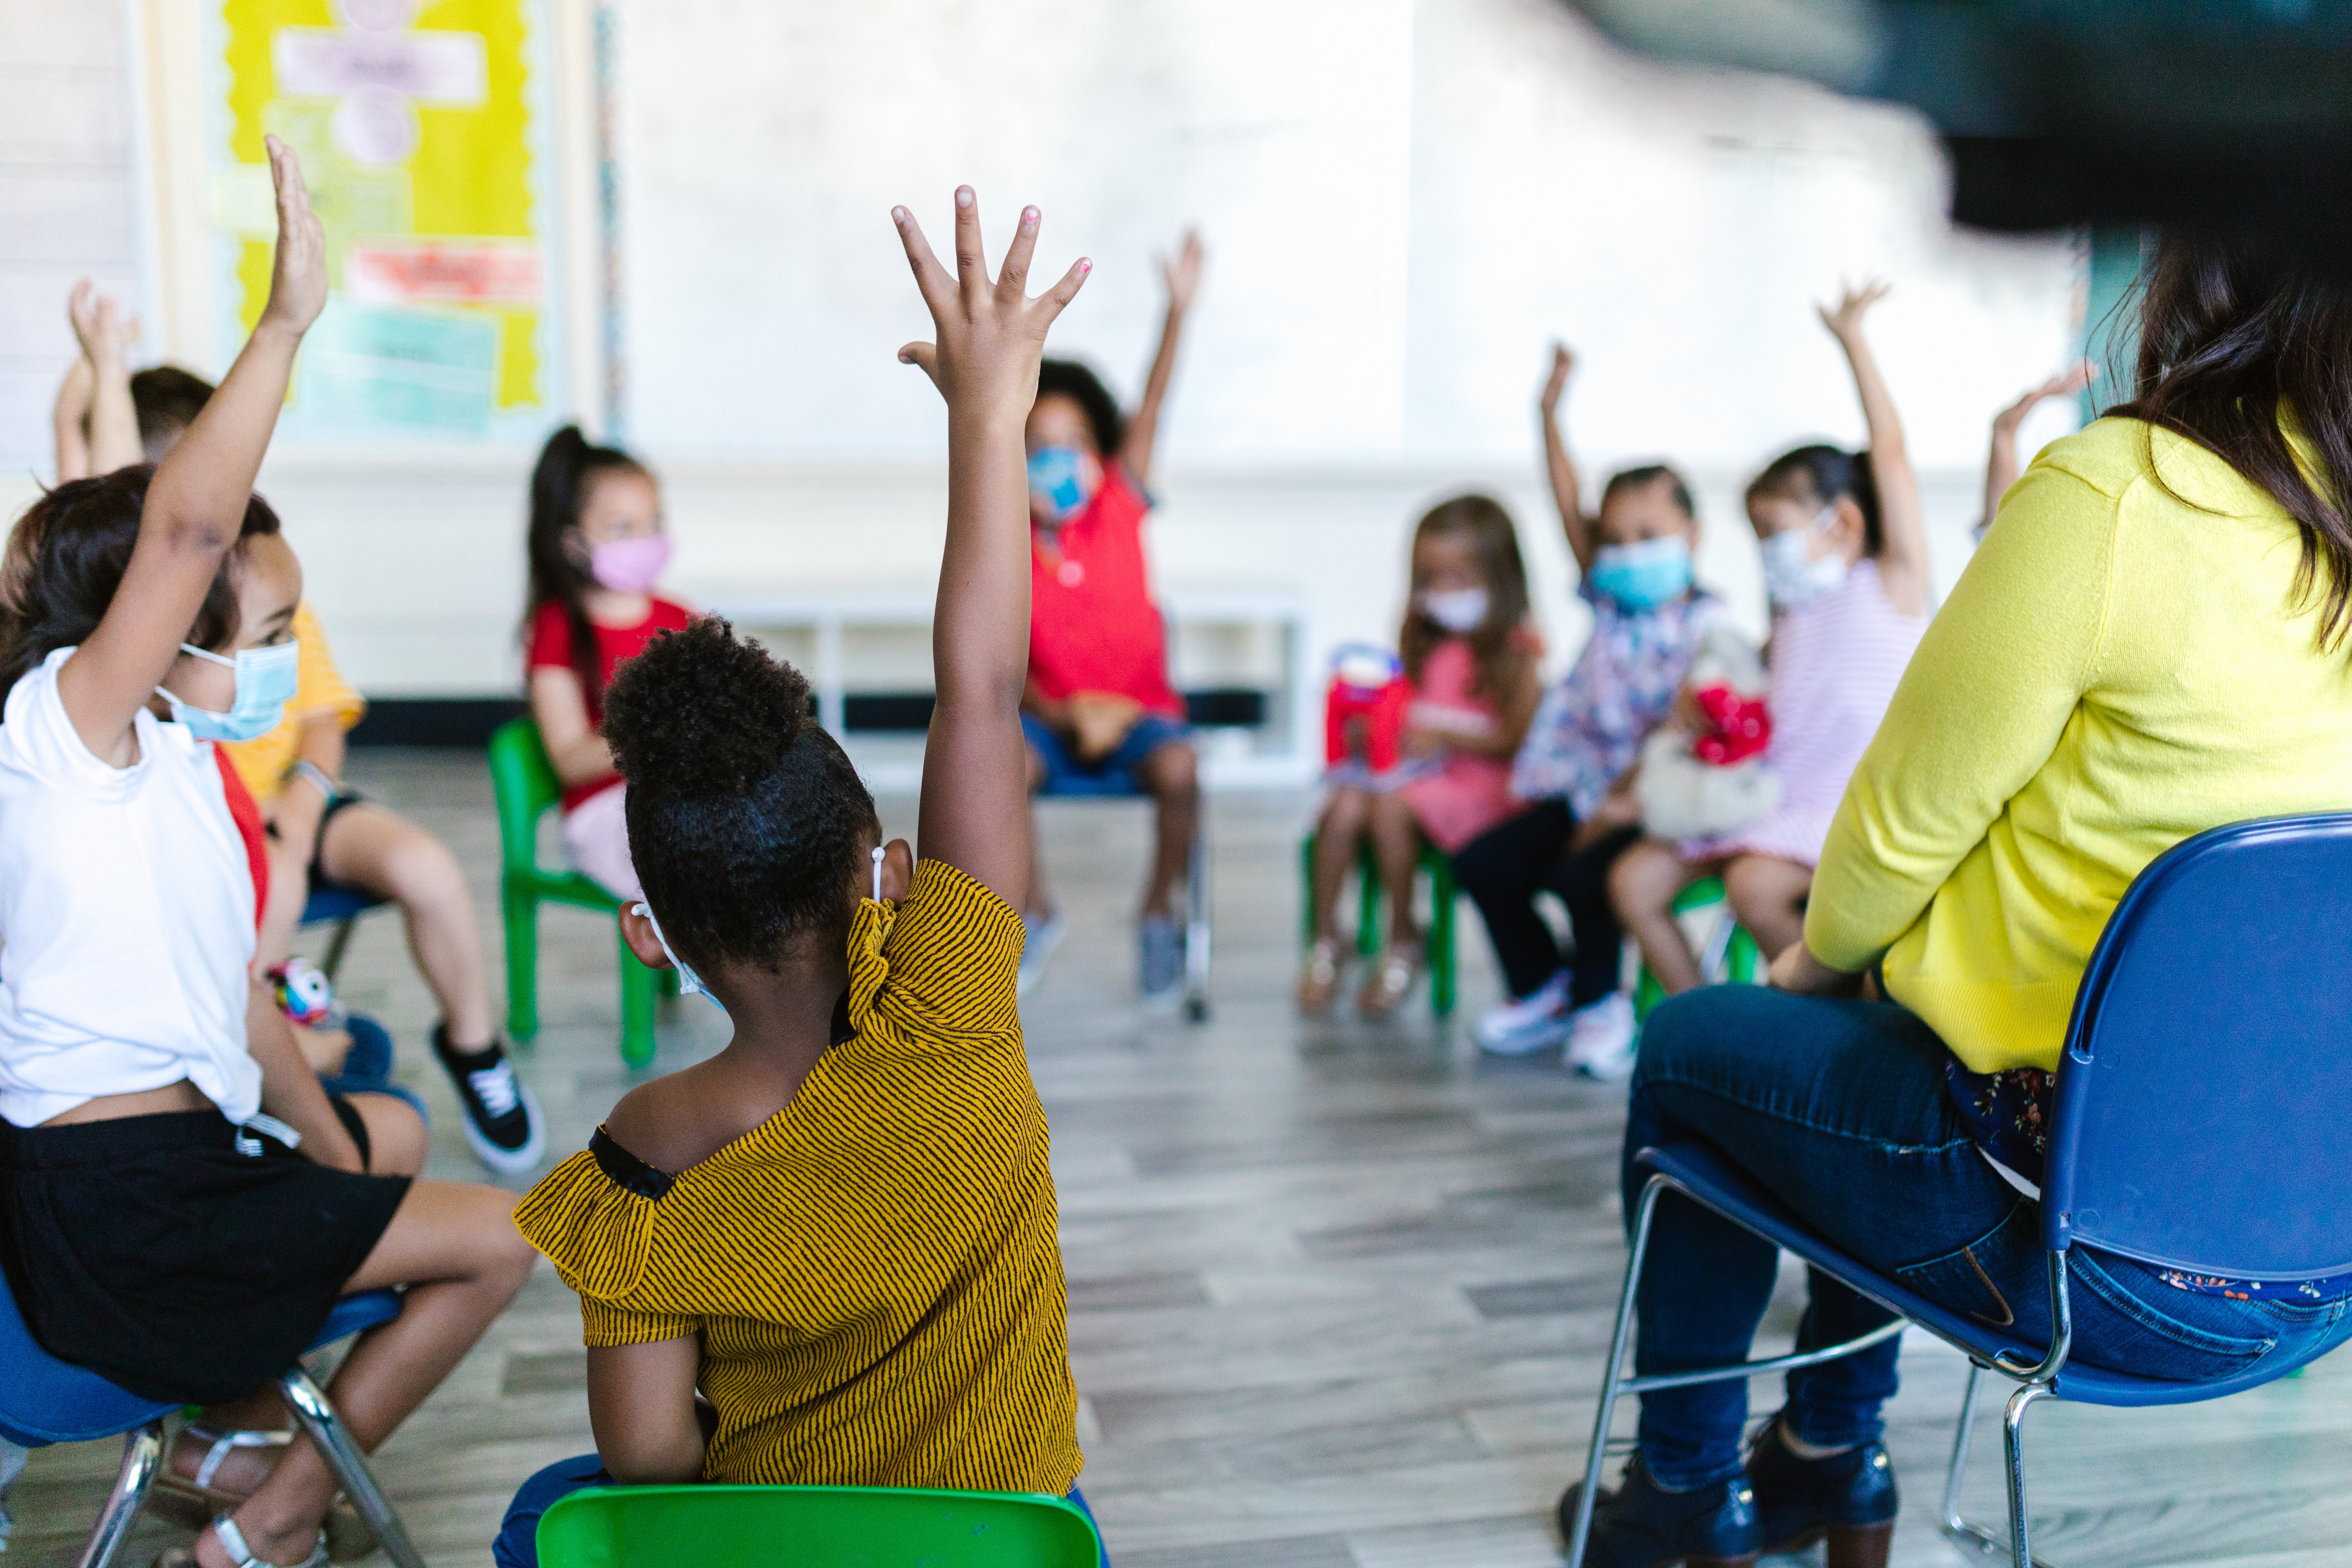 How to encourage active learning in children